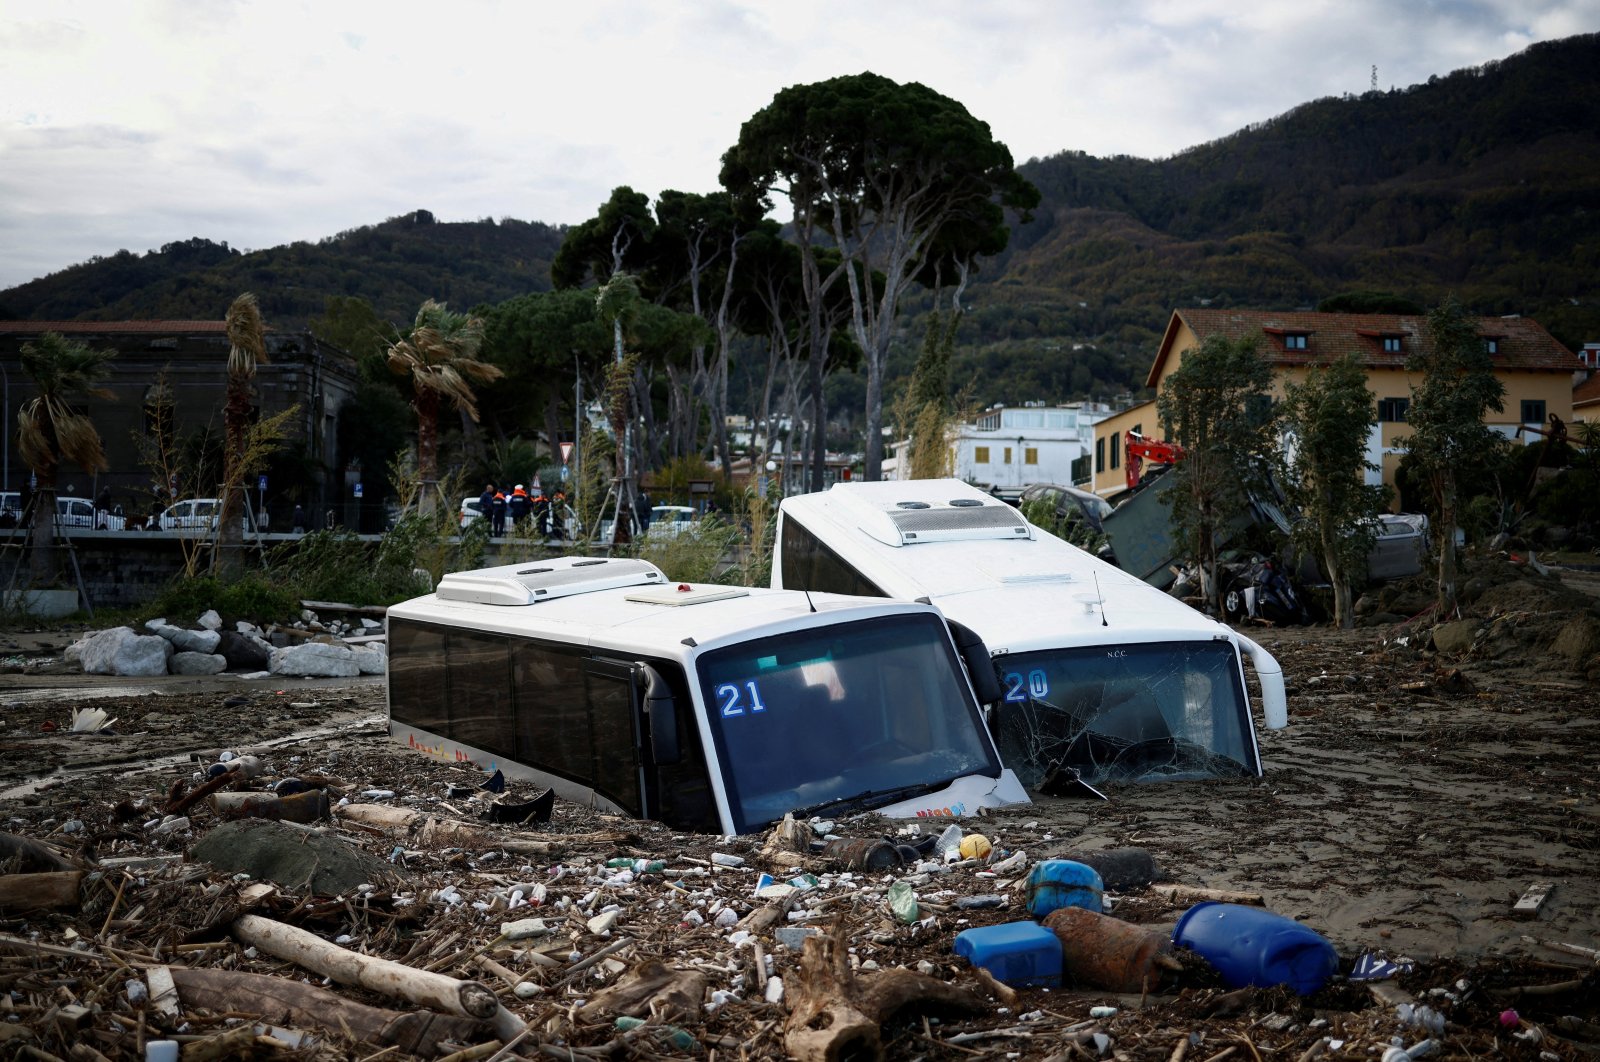 Damaged buses lie among debris following a landslide on the Italian holiday island of Ischia, Italy, Nov. 27, 2022. (Reuters Photo)